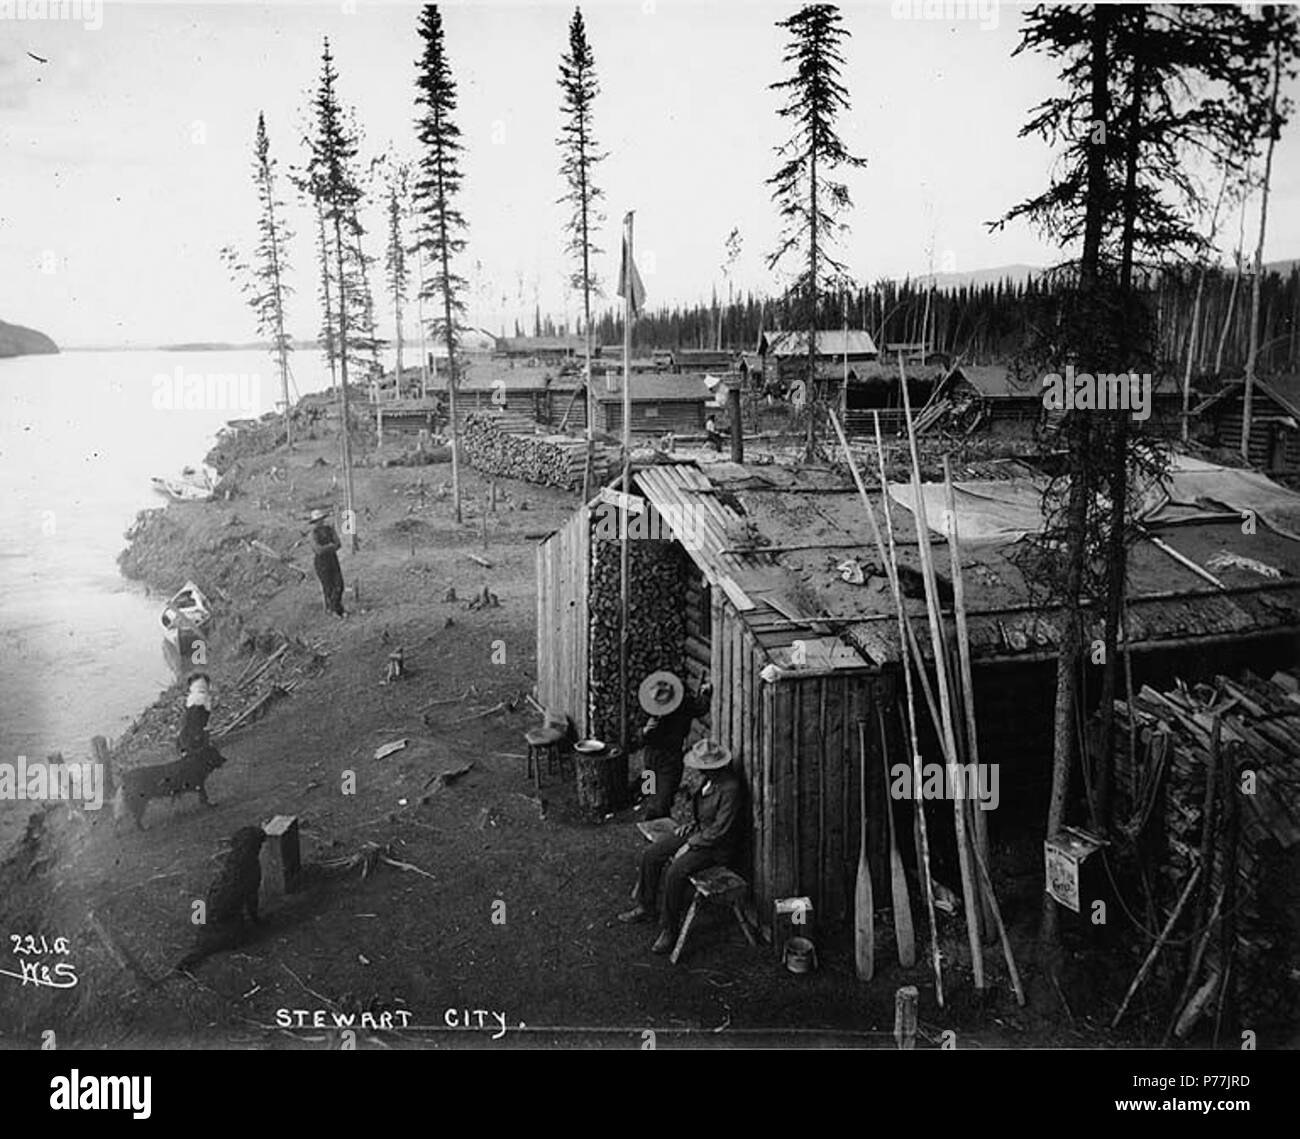 . English: Stewart City on the Stewart River, Yukon Territory, ca. 1898. English: This settlement served as a wood point for steamboats and a stopping point for those headed toward the Klondike. Shows log cabins and wood piles . Caption on image: 'Stewart City' Original photograph by Eric A. Hegg 146; copied by Webster and Stevens 221.A. Subjects (LCTGM): Rivers--Yukon; Log buildings--Yukon--Stewart City; Storage facilities--Yukon--Stewart City; Fuelwood--Yukon--Stewart City Subjects (LCSH): Stewart River (Yukon)  . circa 1898 12 Stewart City on the Stewart River, Yukon Territory, ca 1898 (HEG Stock Photo